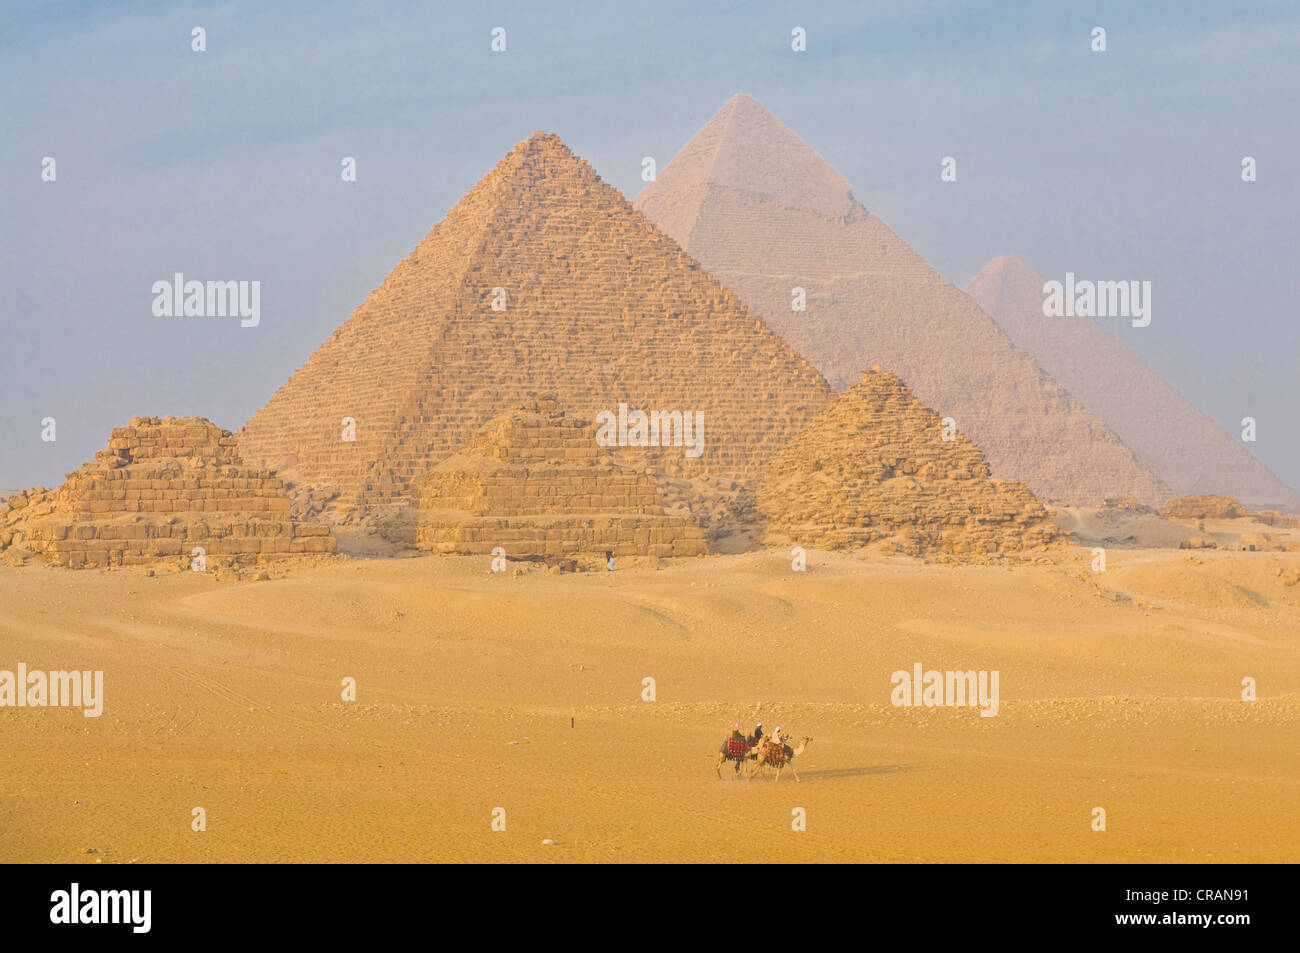 Riders on camels in front of the Pyramids of Giza, UNESCO World Heritage Site, Egypt, Africa Stock Photo